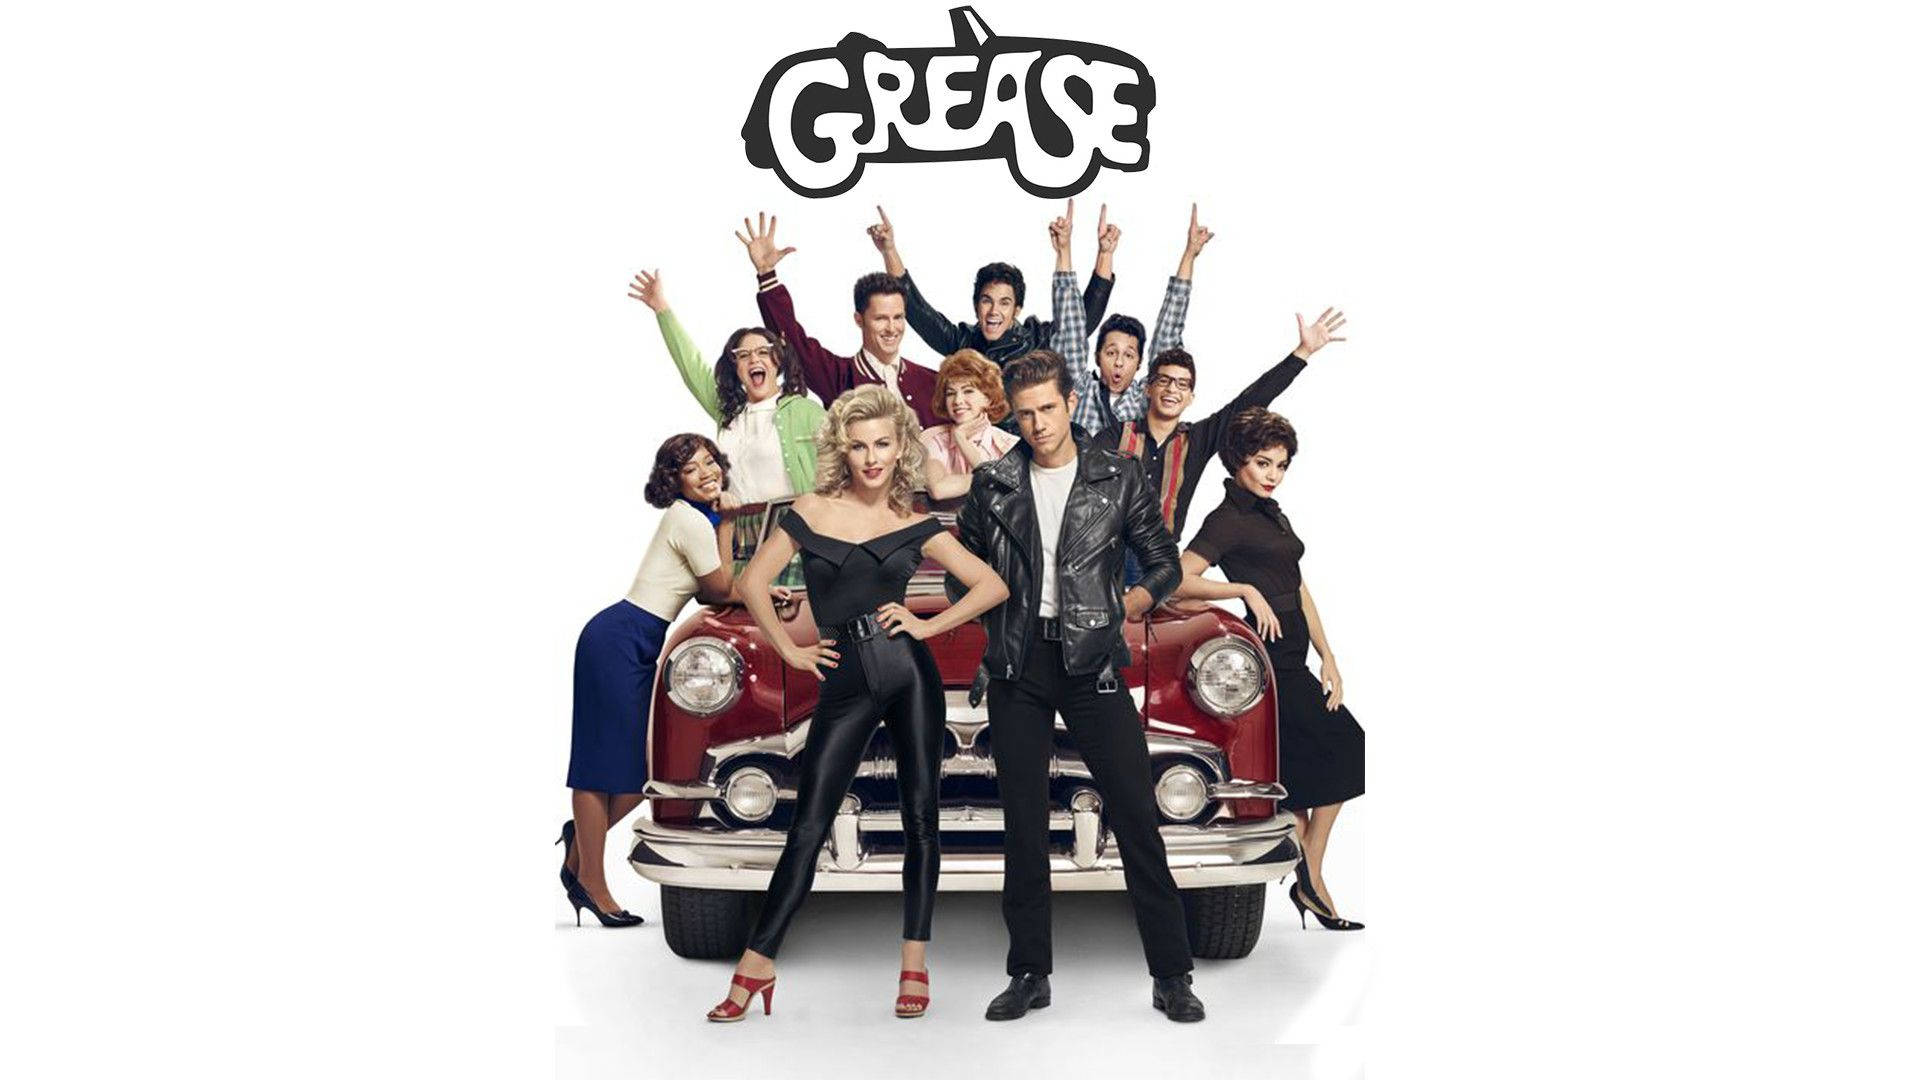 Iconic Poster Of The Grease Movie Remake